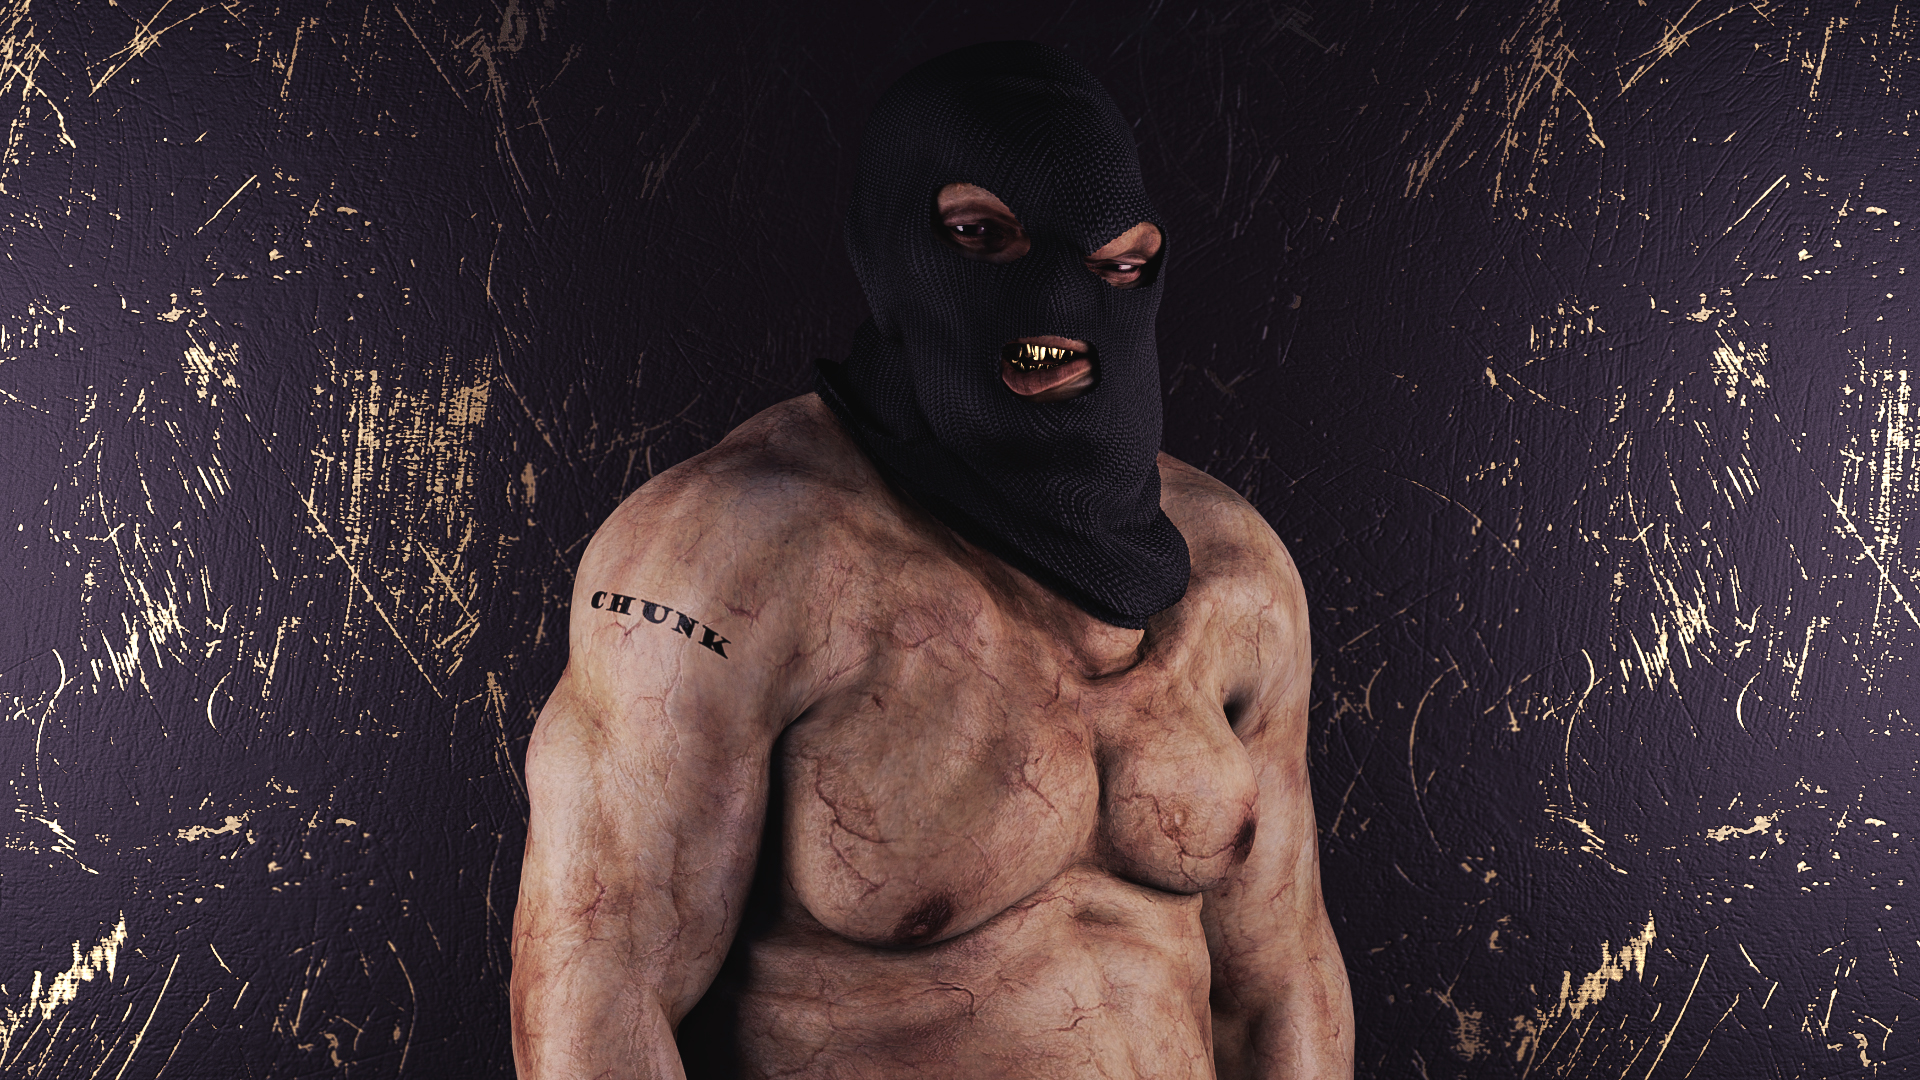 Men The Goonies Sloth Goonies Masked Gold Teeth Tattoo Ski Mask Muscles Biceps Texture Scratches Gol 1920x1080